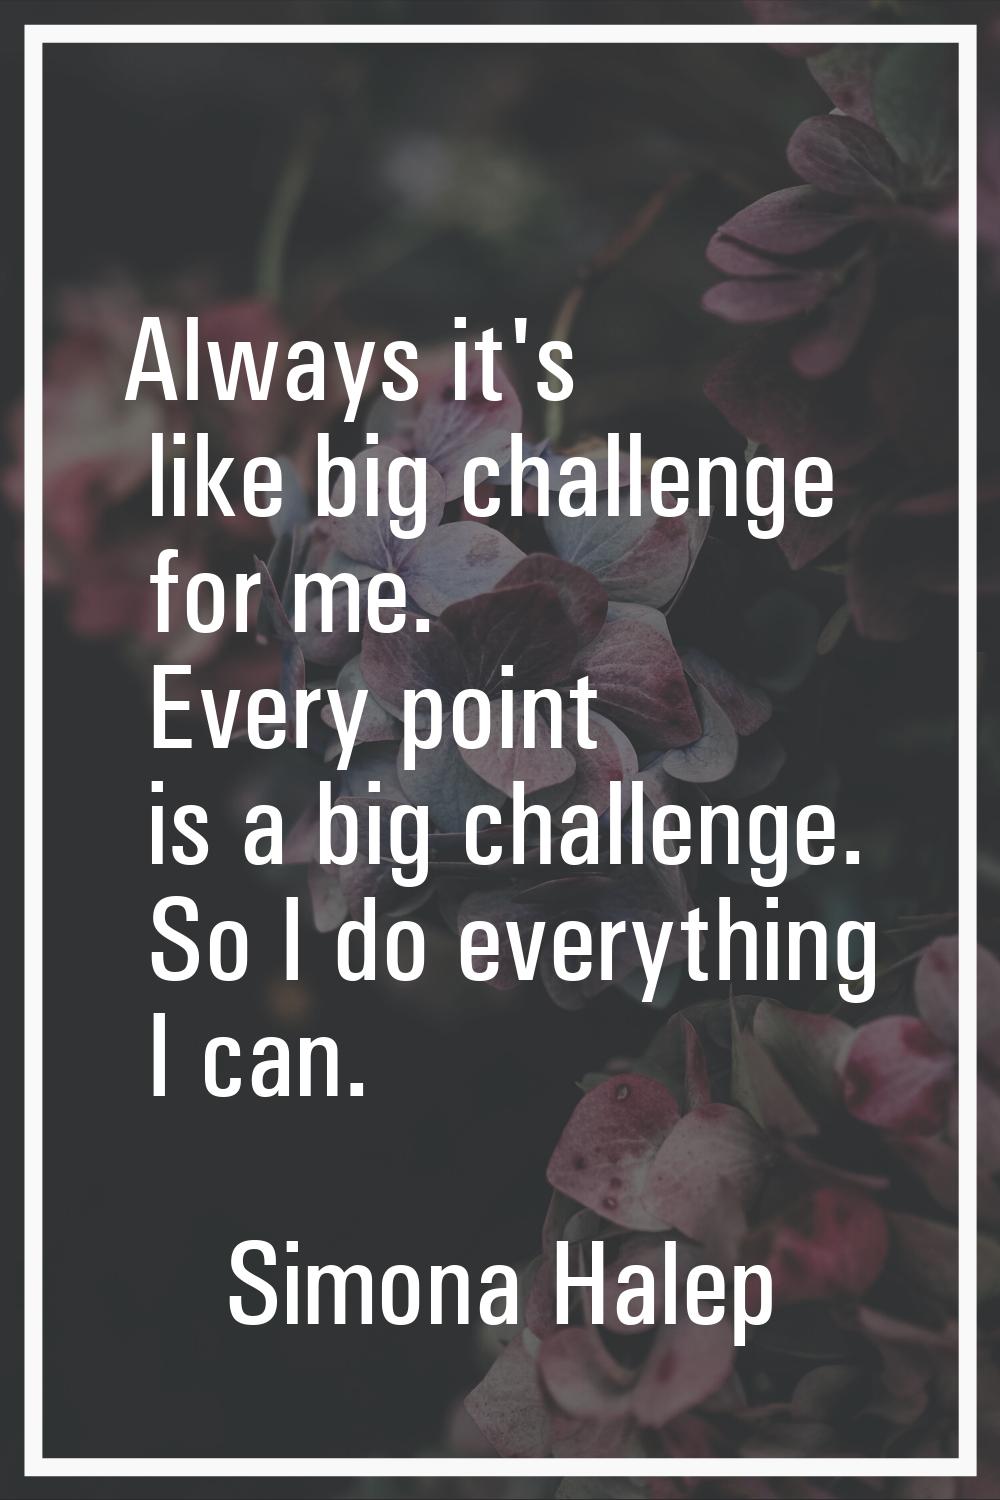 Always it's like big challenge for me. Every point is a big challenge. So I do everything I can.